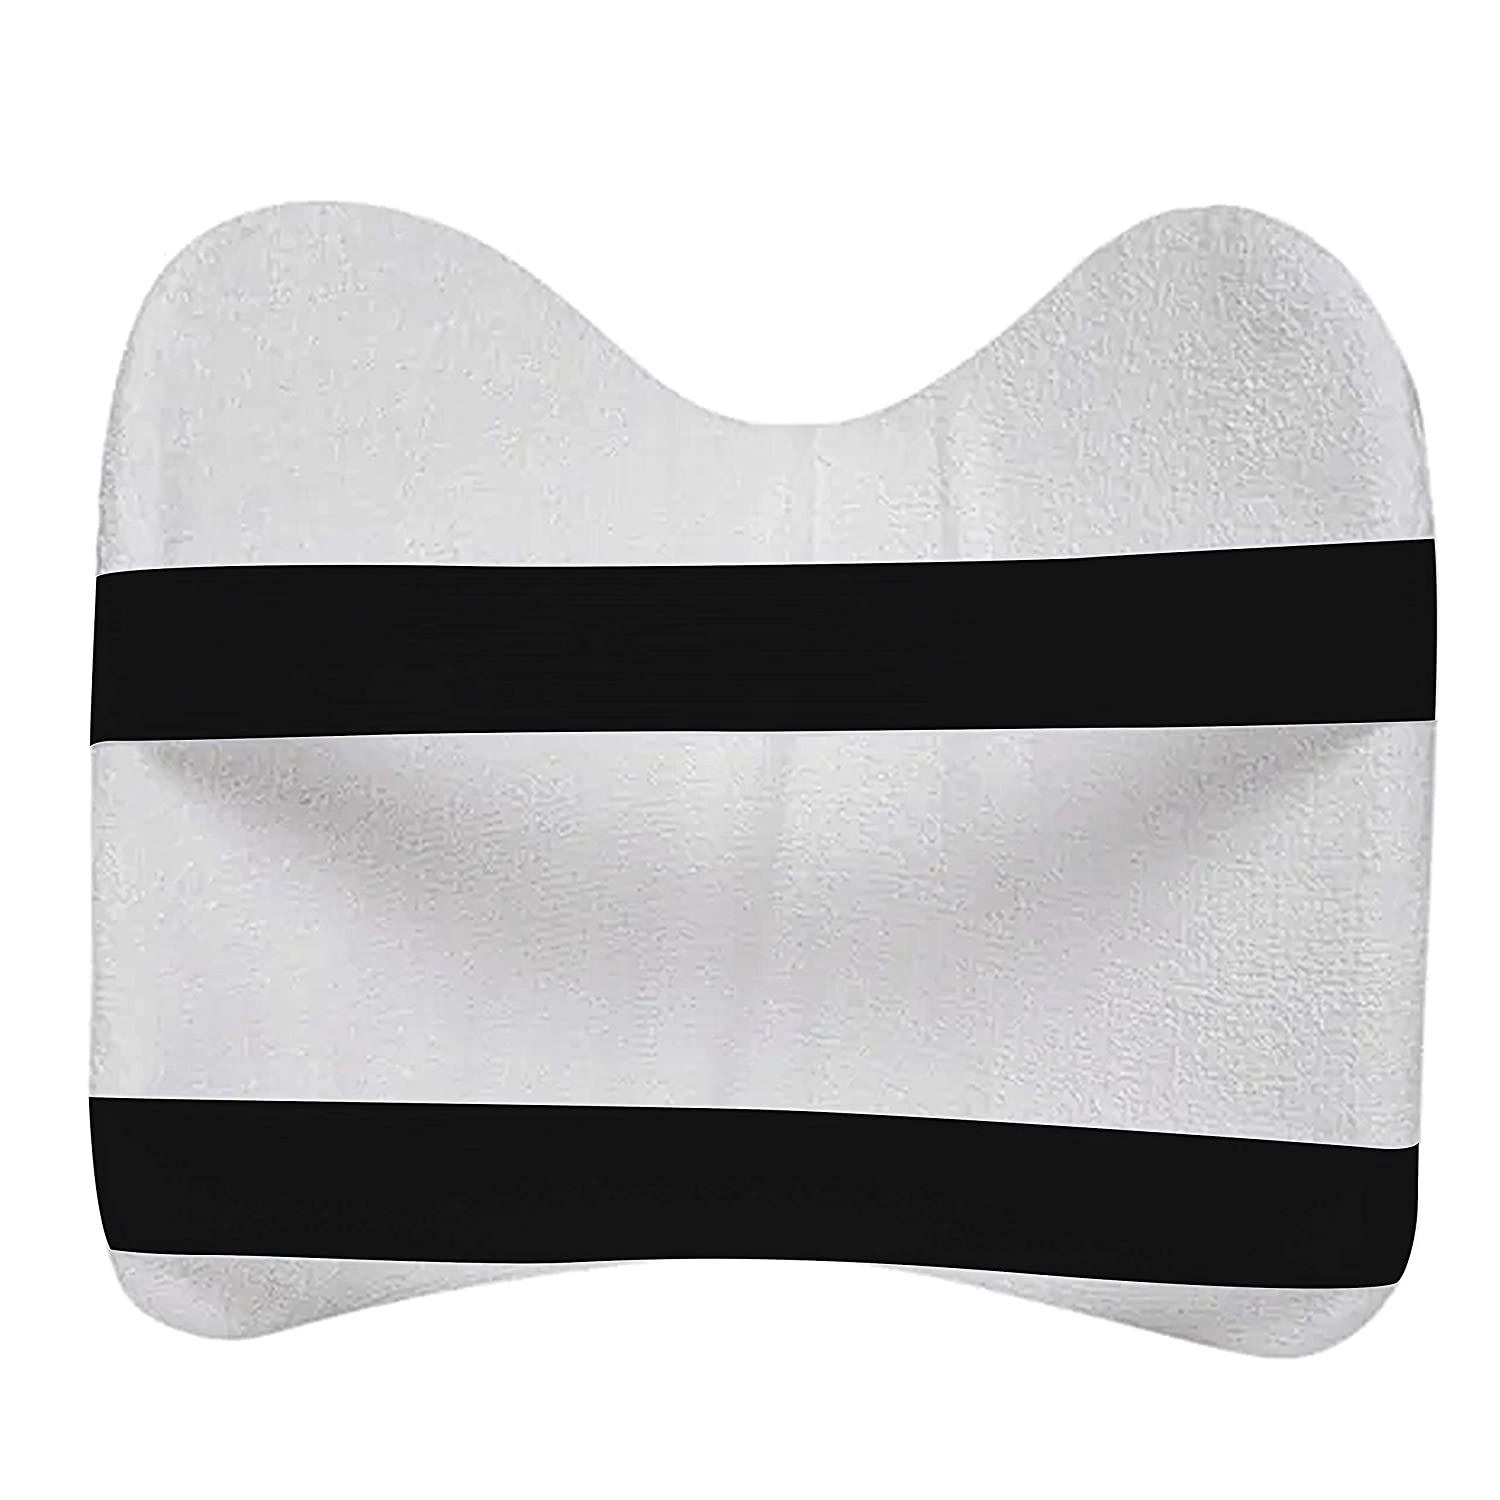 SG CHEST GUARD (ADULT)